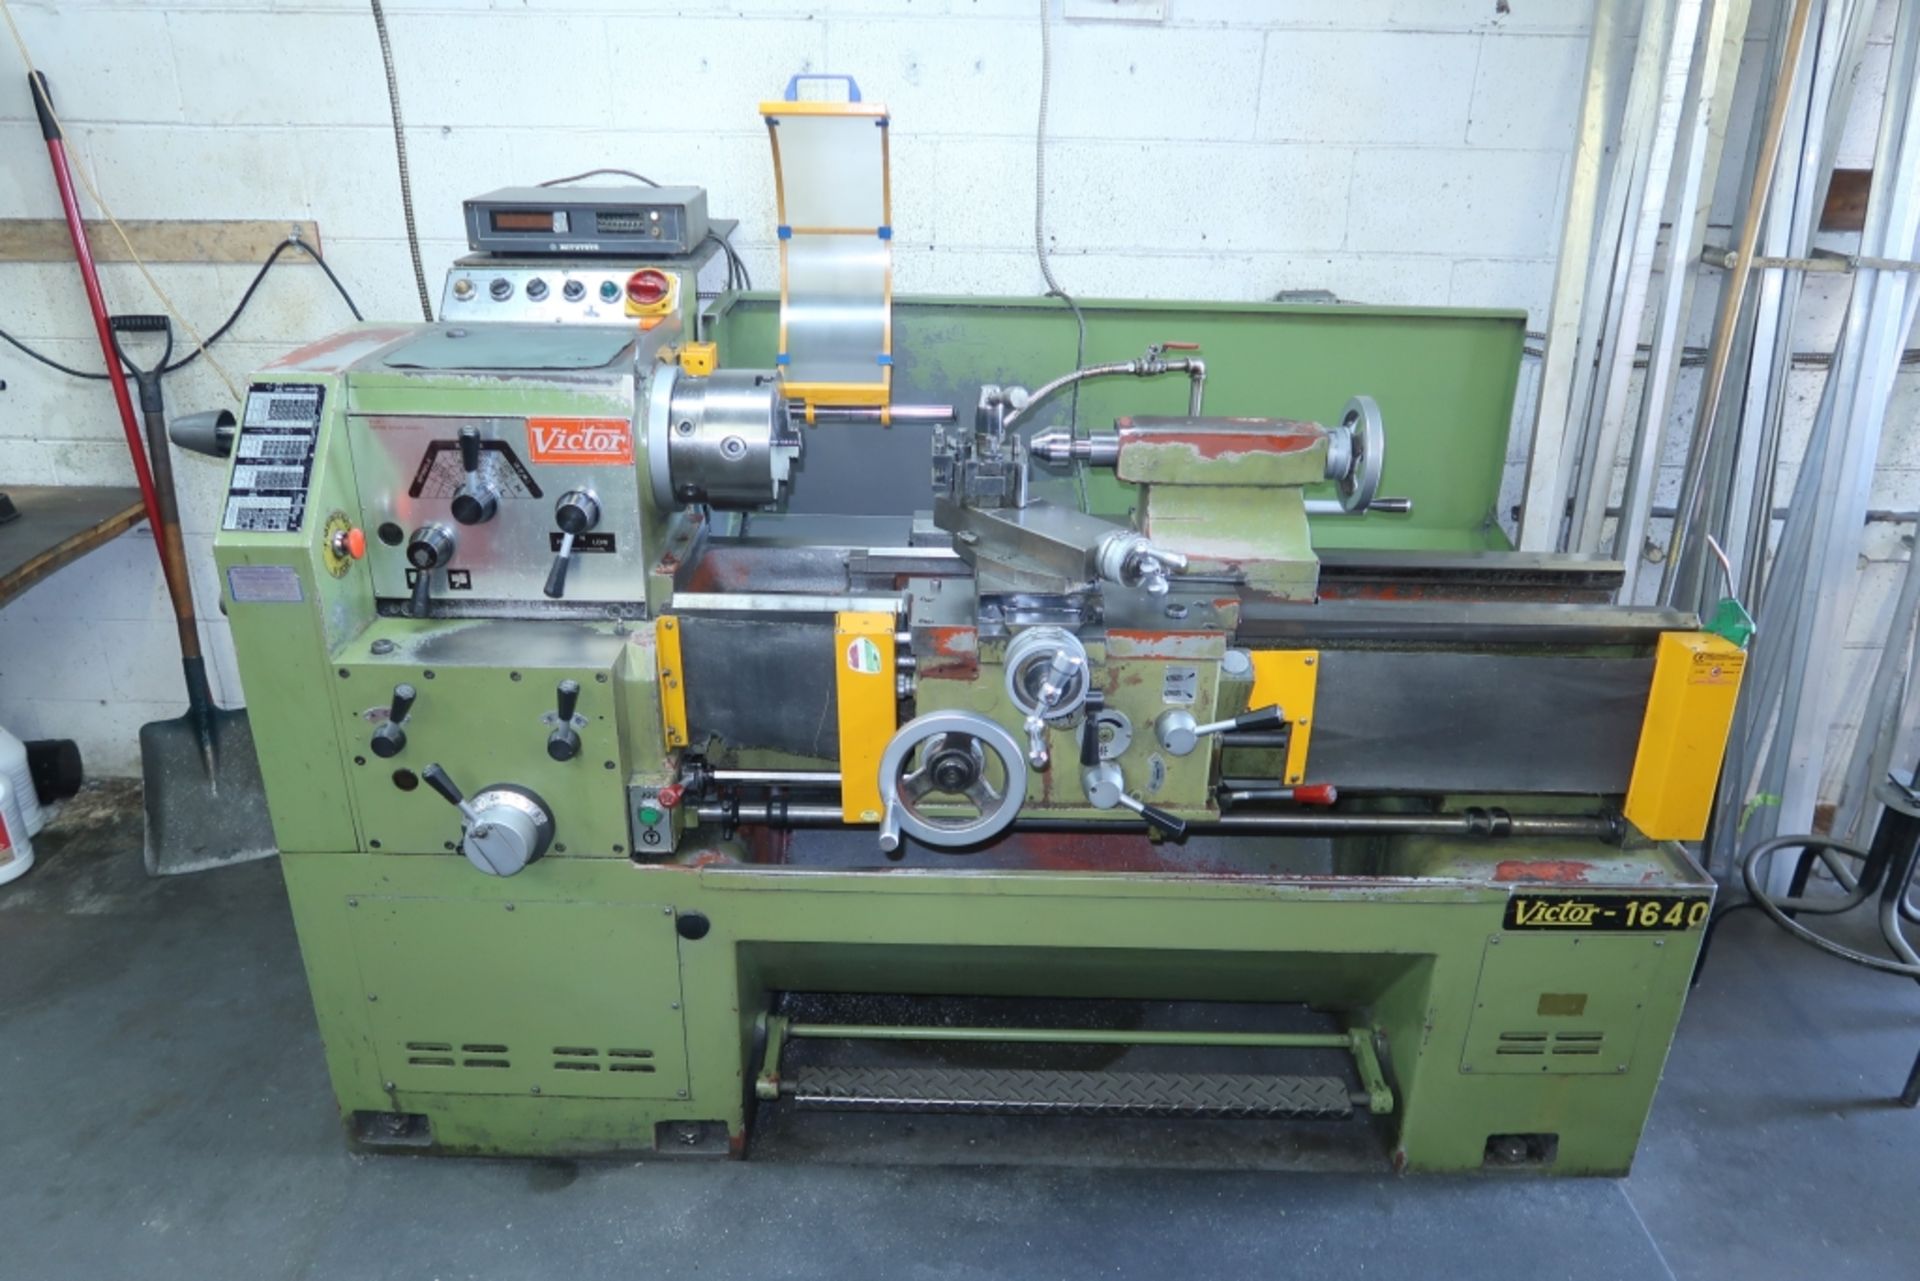 VICTOR 1640 GAP BED LATHE, 3 JAW CHUCK, 2 1/4'' SPINDLE, TAIL STOCK, TOOL POST, MITUTOYO 1 AXE (X)